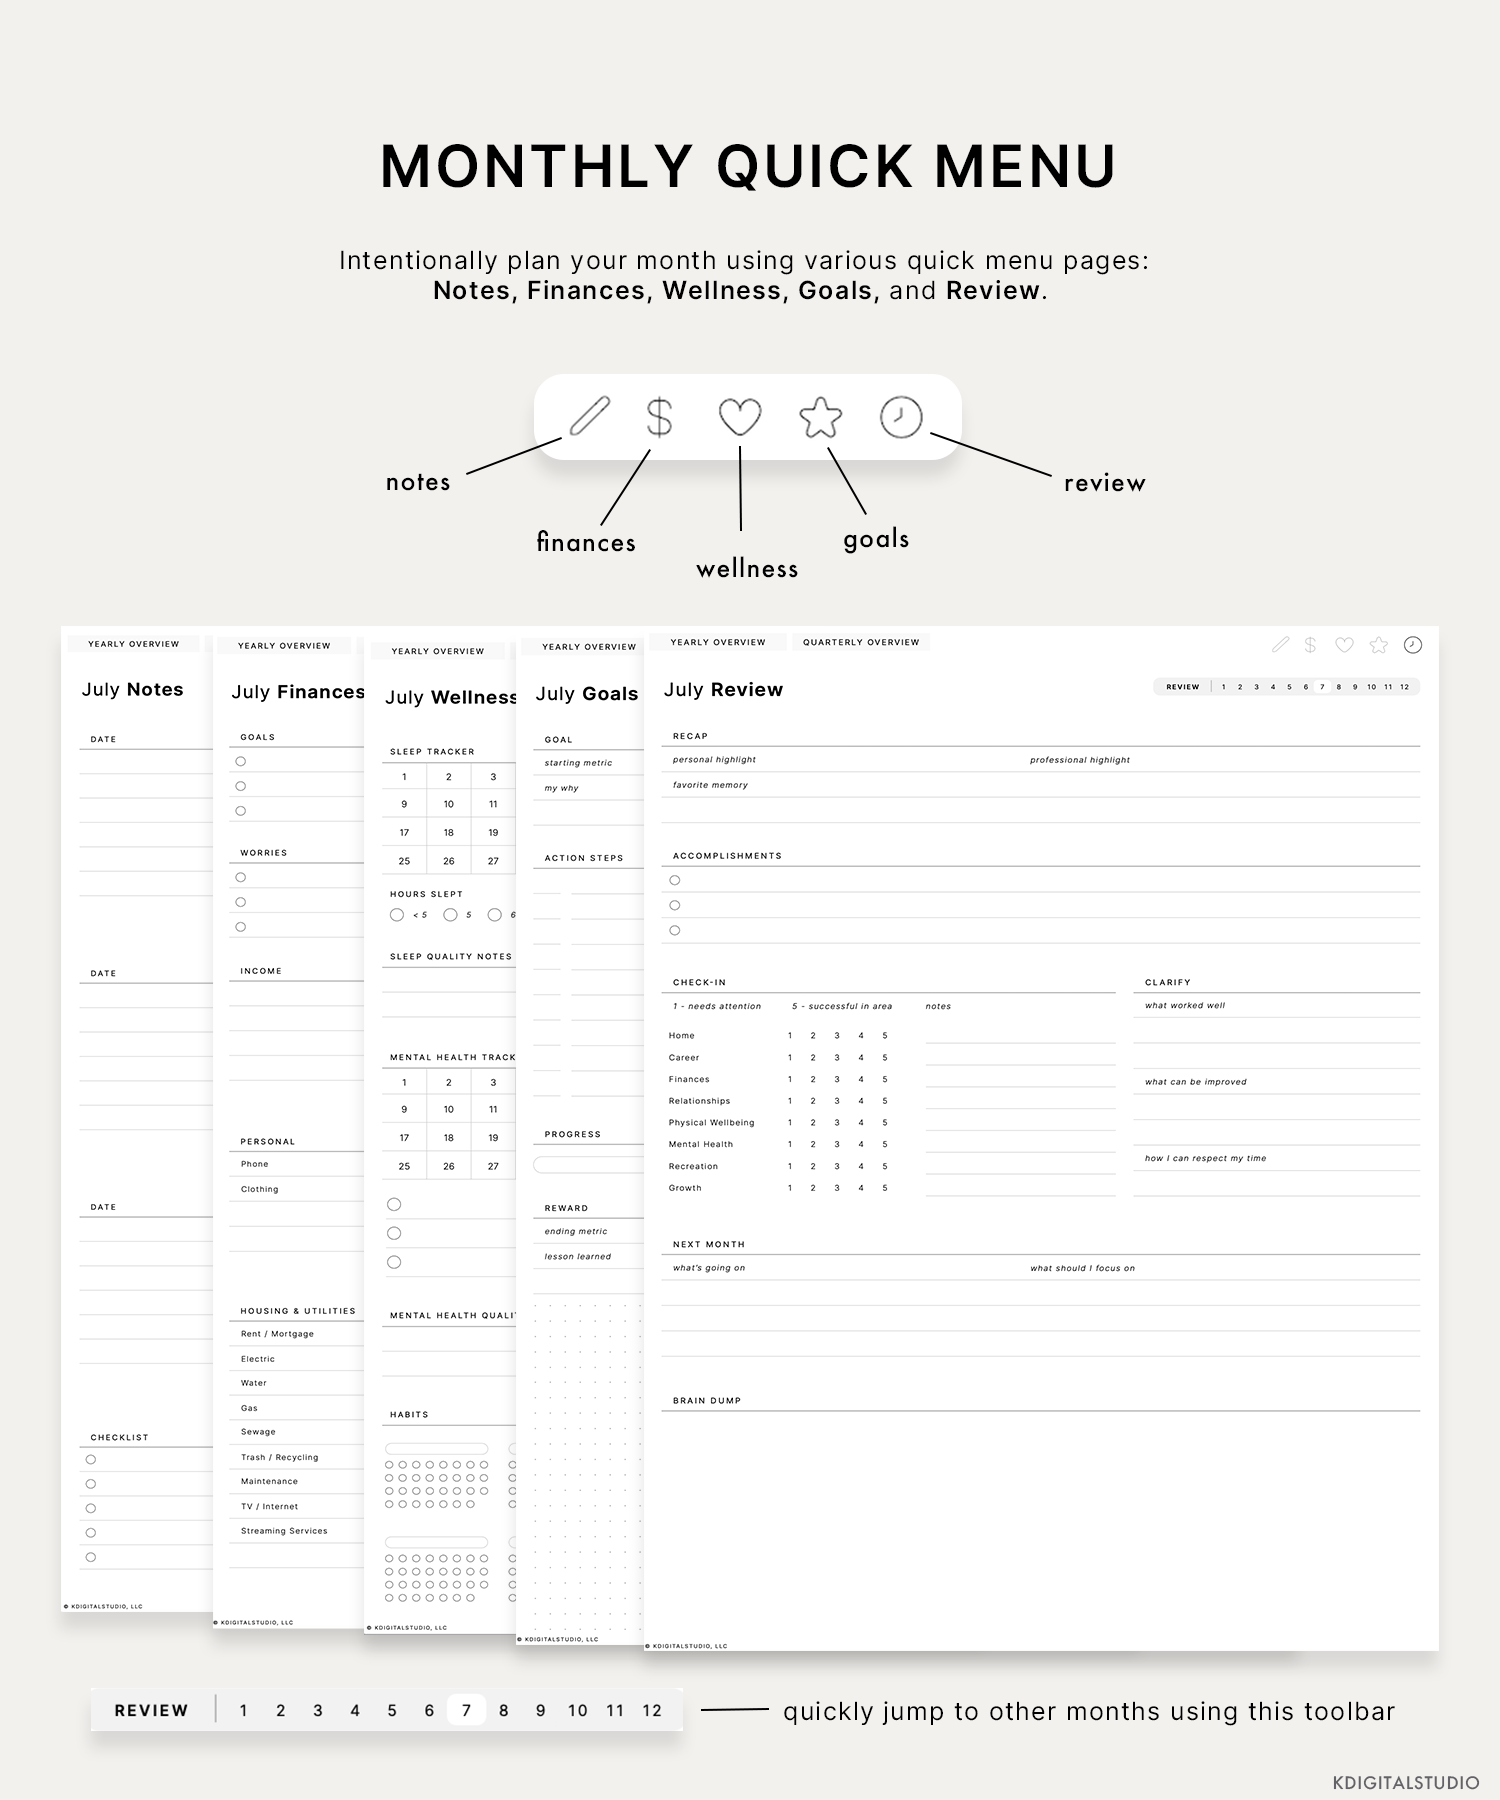 Intentionally plan your month using various quick menu pages for each month: Notes, Finances, Wellness, Goals, and Review.